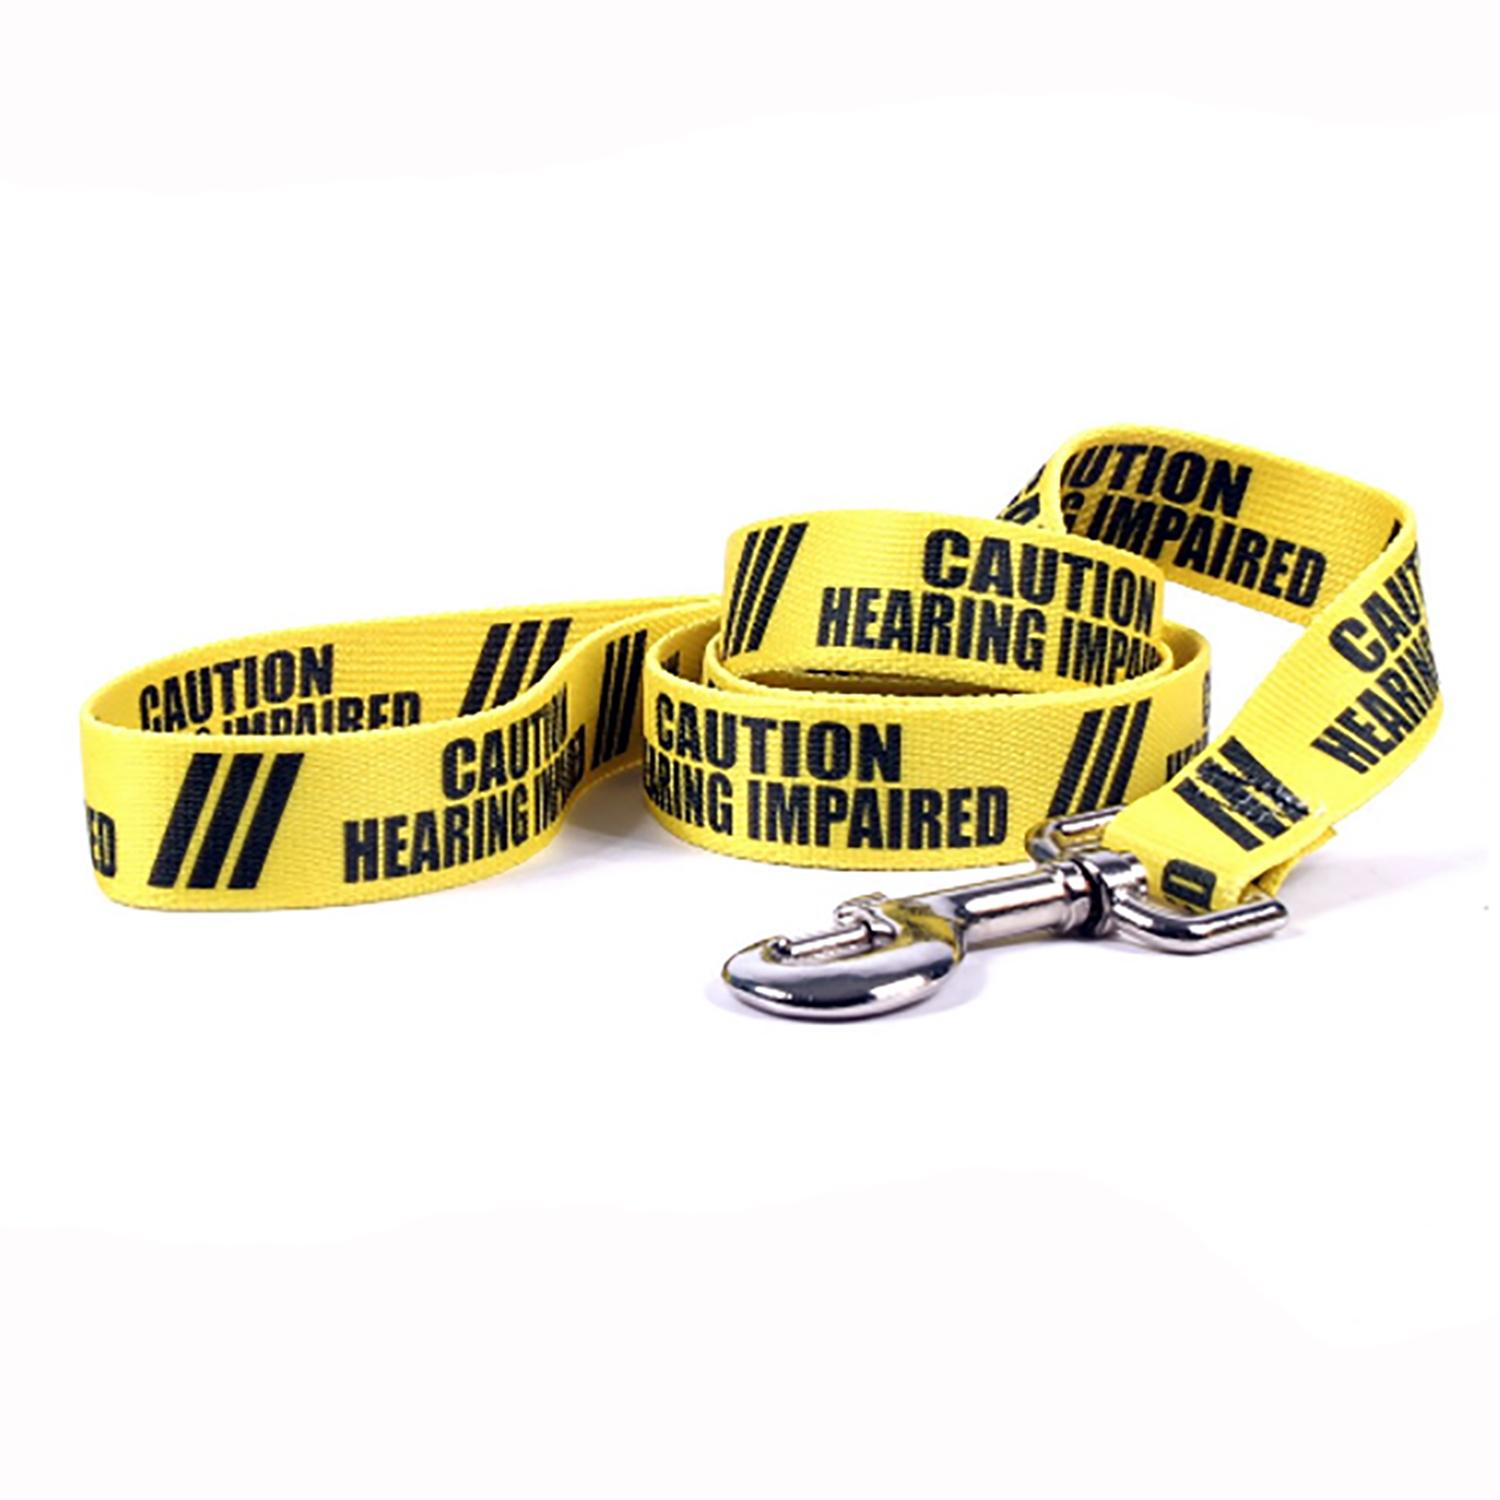 Caution Dog Leash by Yellow Dog - Hearing Impaired